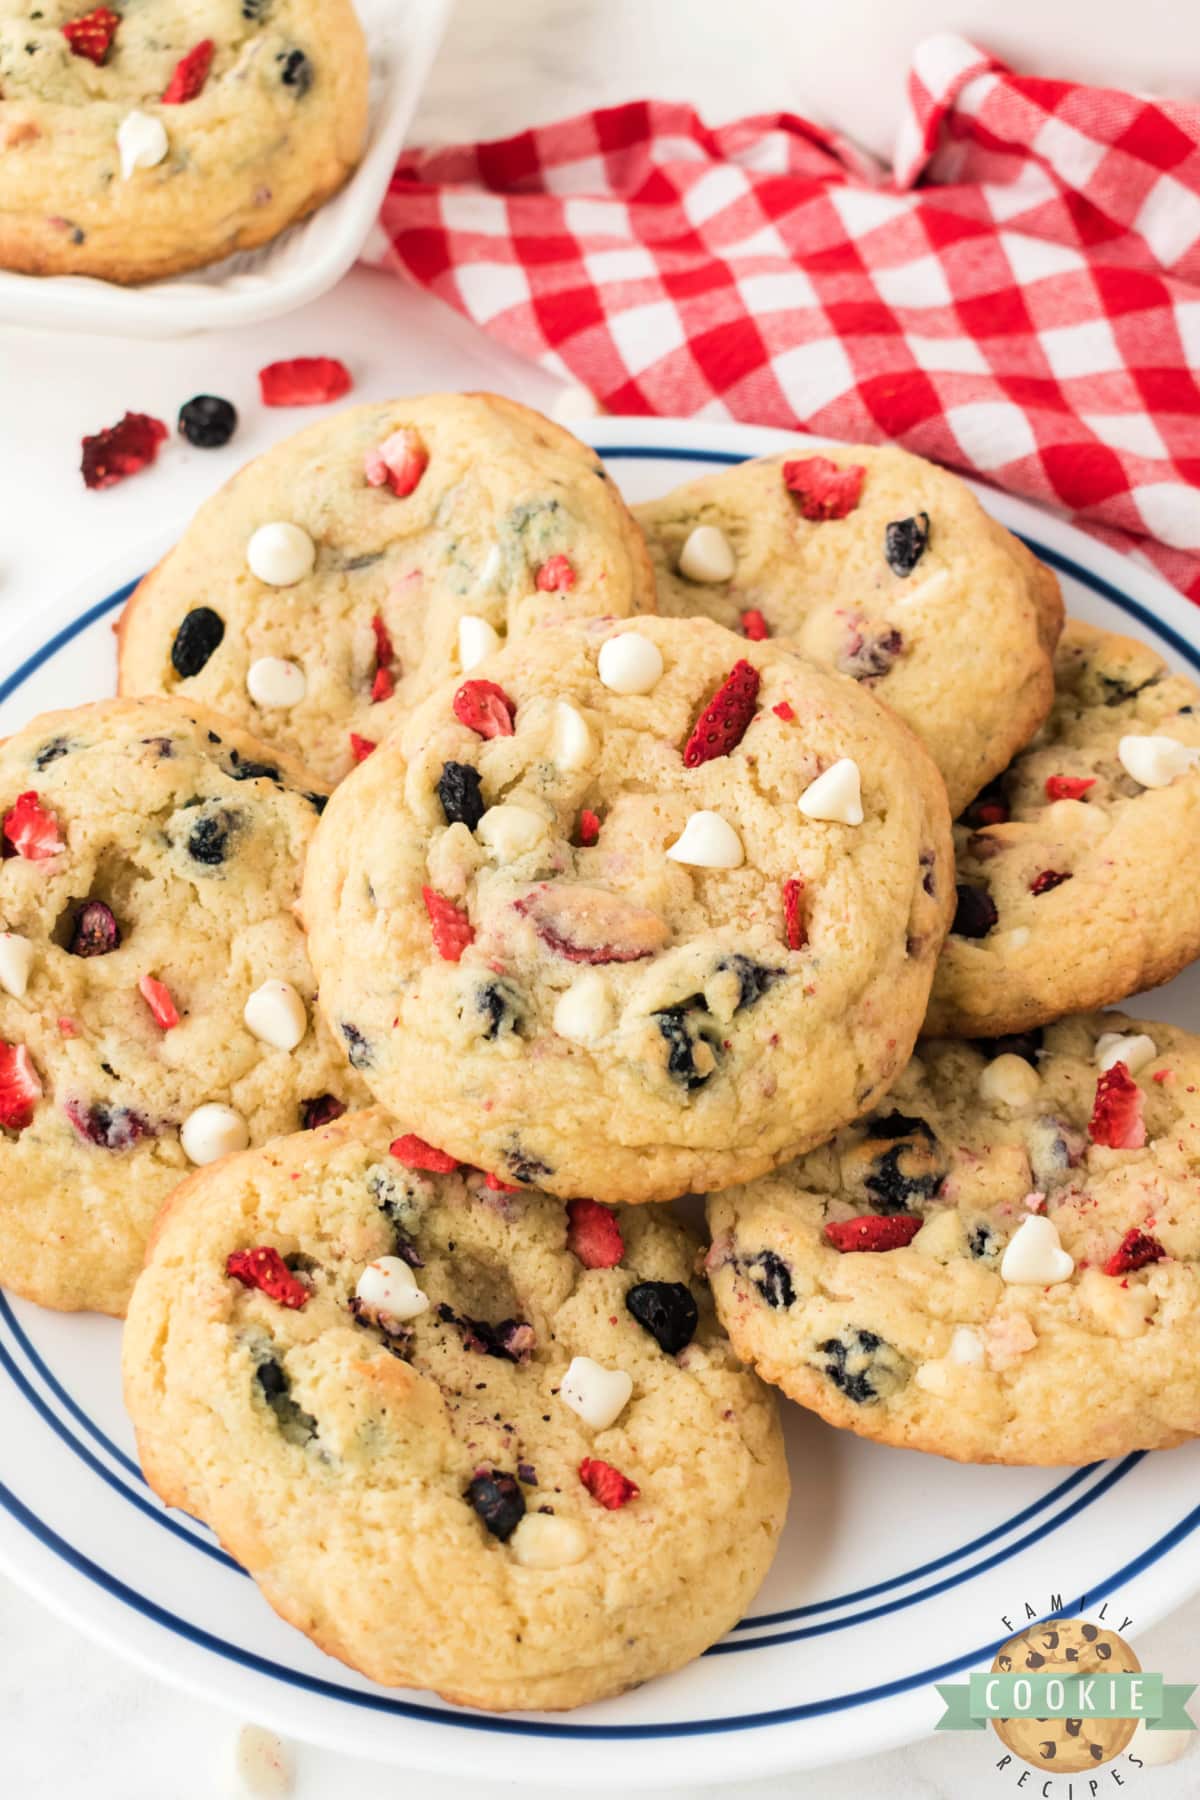 Red, White & Blue Cream Cheese Cookies are soft, chewy, and perfectly patriotic! These delicious cookies are made with freeze-dried blueberries and strawberries that add lots of flavor and the right colors for the 4th of July.